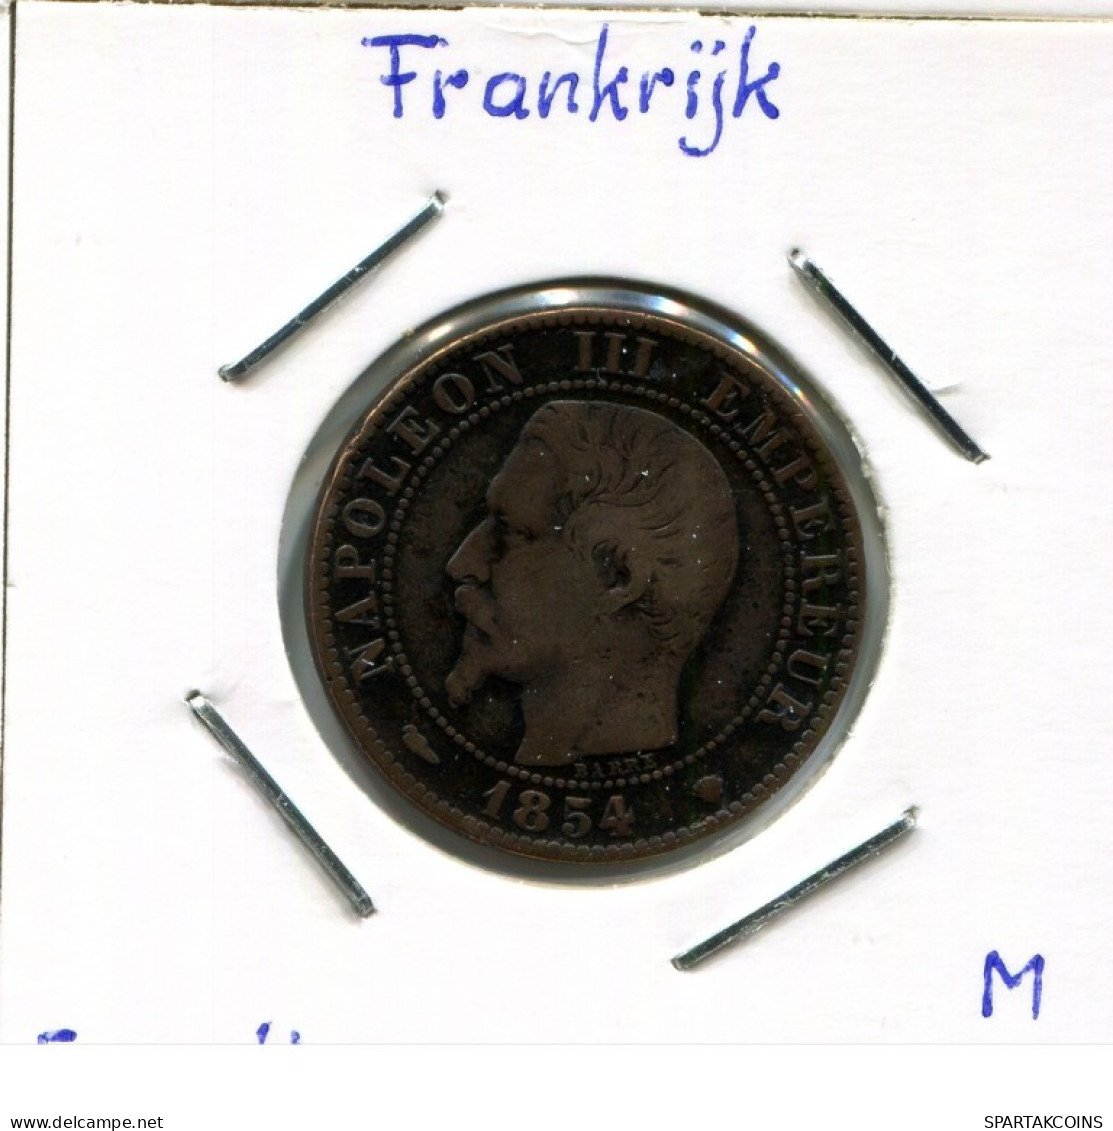 2 CENTIMES 1855 A FRANKREICH FRANCE Napoleon III Imperator #AK989.D.A - 2 Centimes